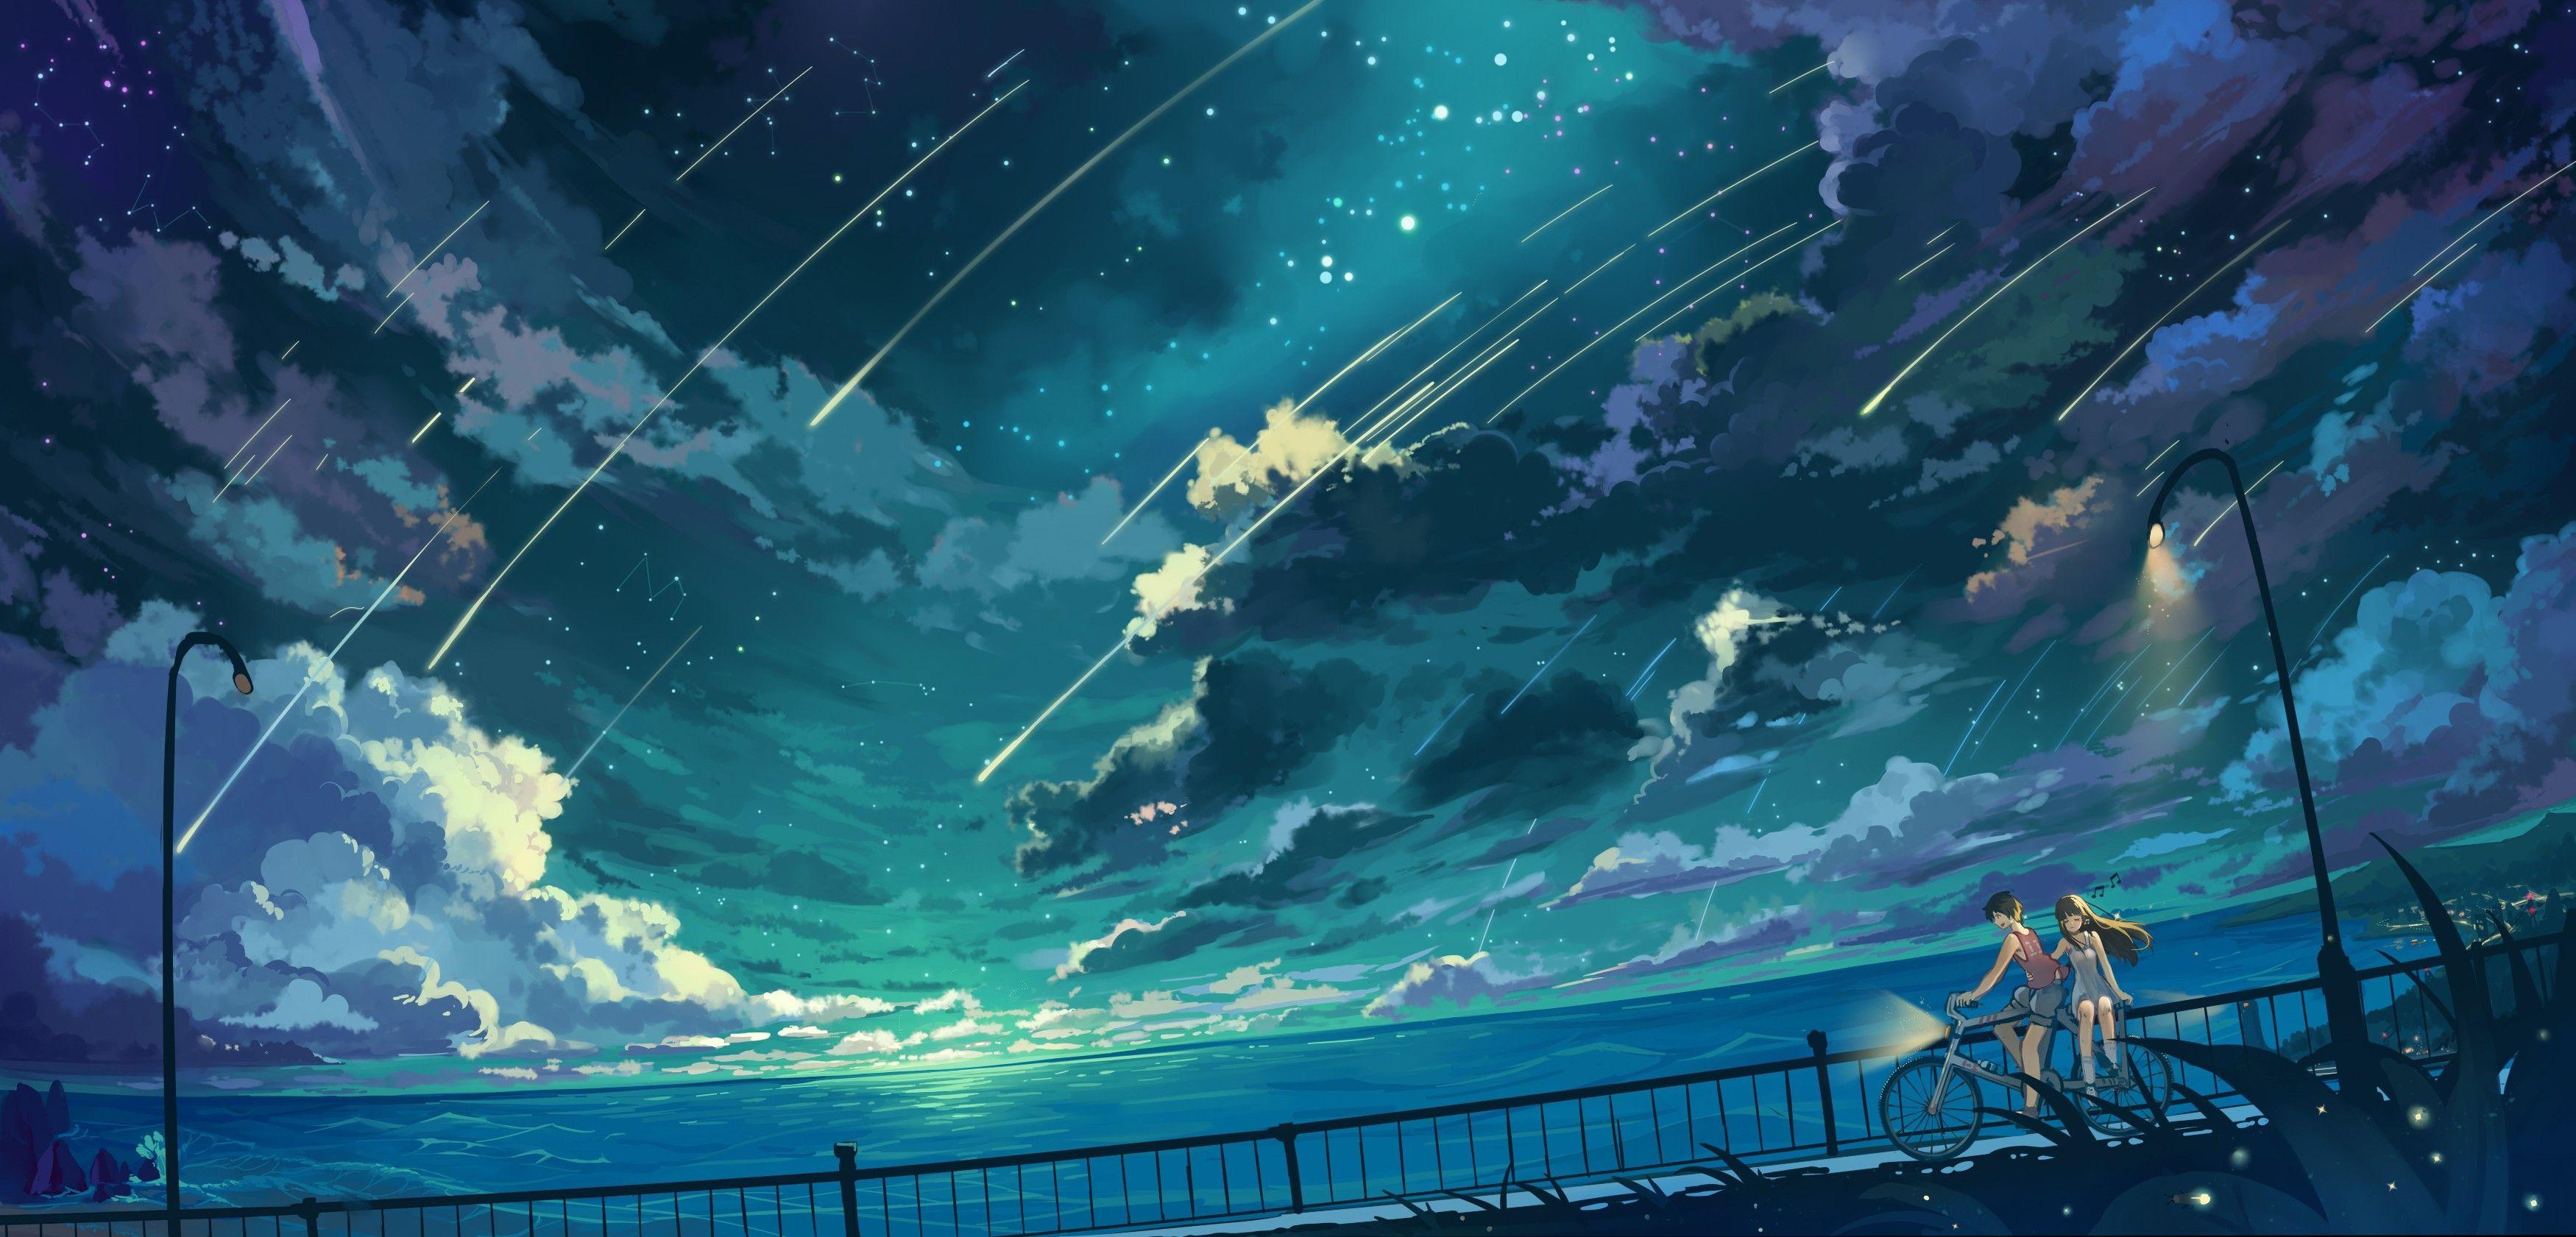 Mobile wallpaper Anime Starry Sky Original Shooting Star 951909  download the picture for free